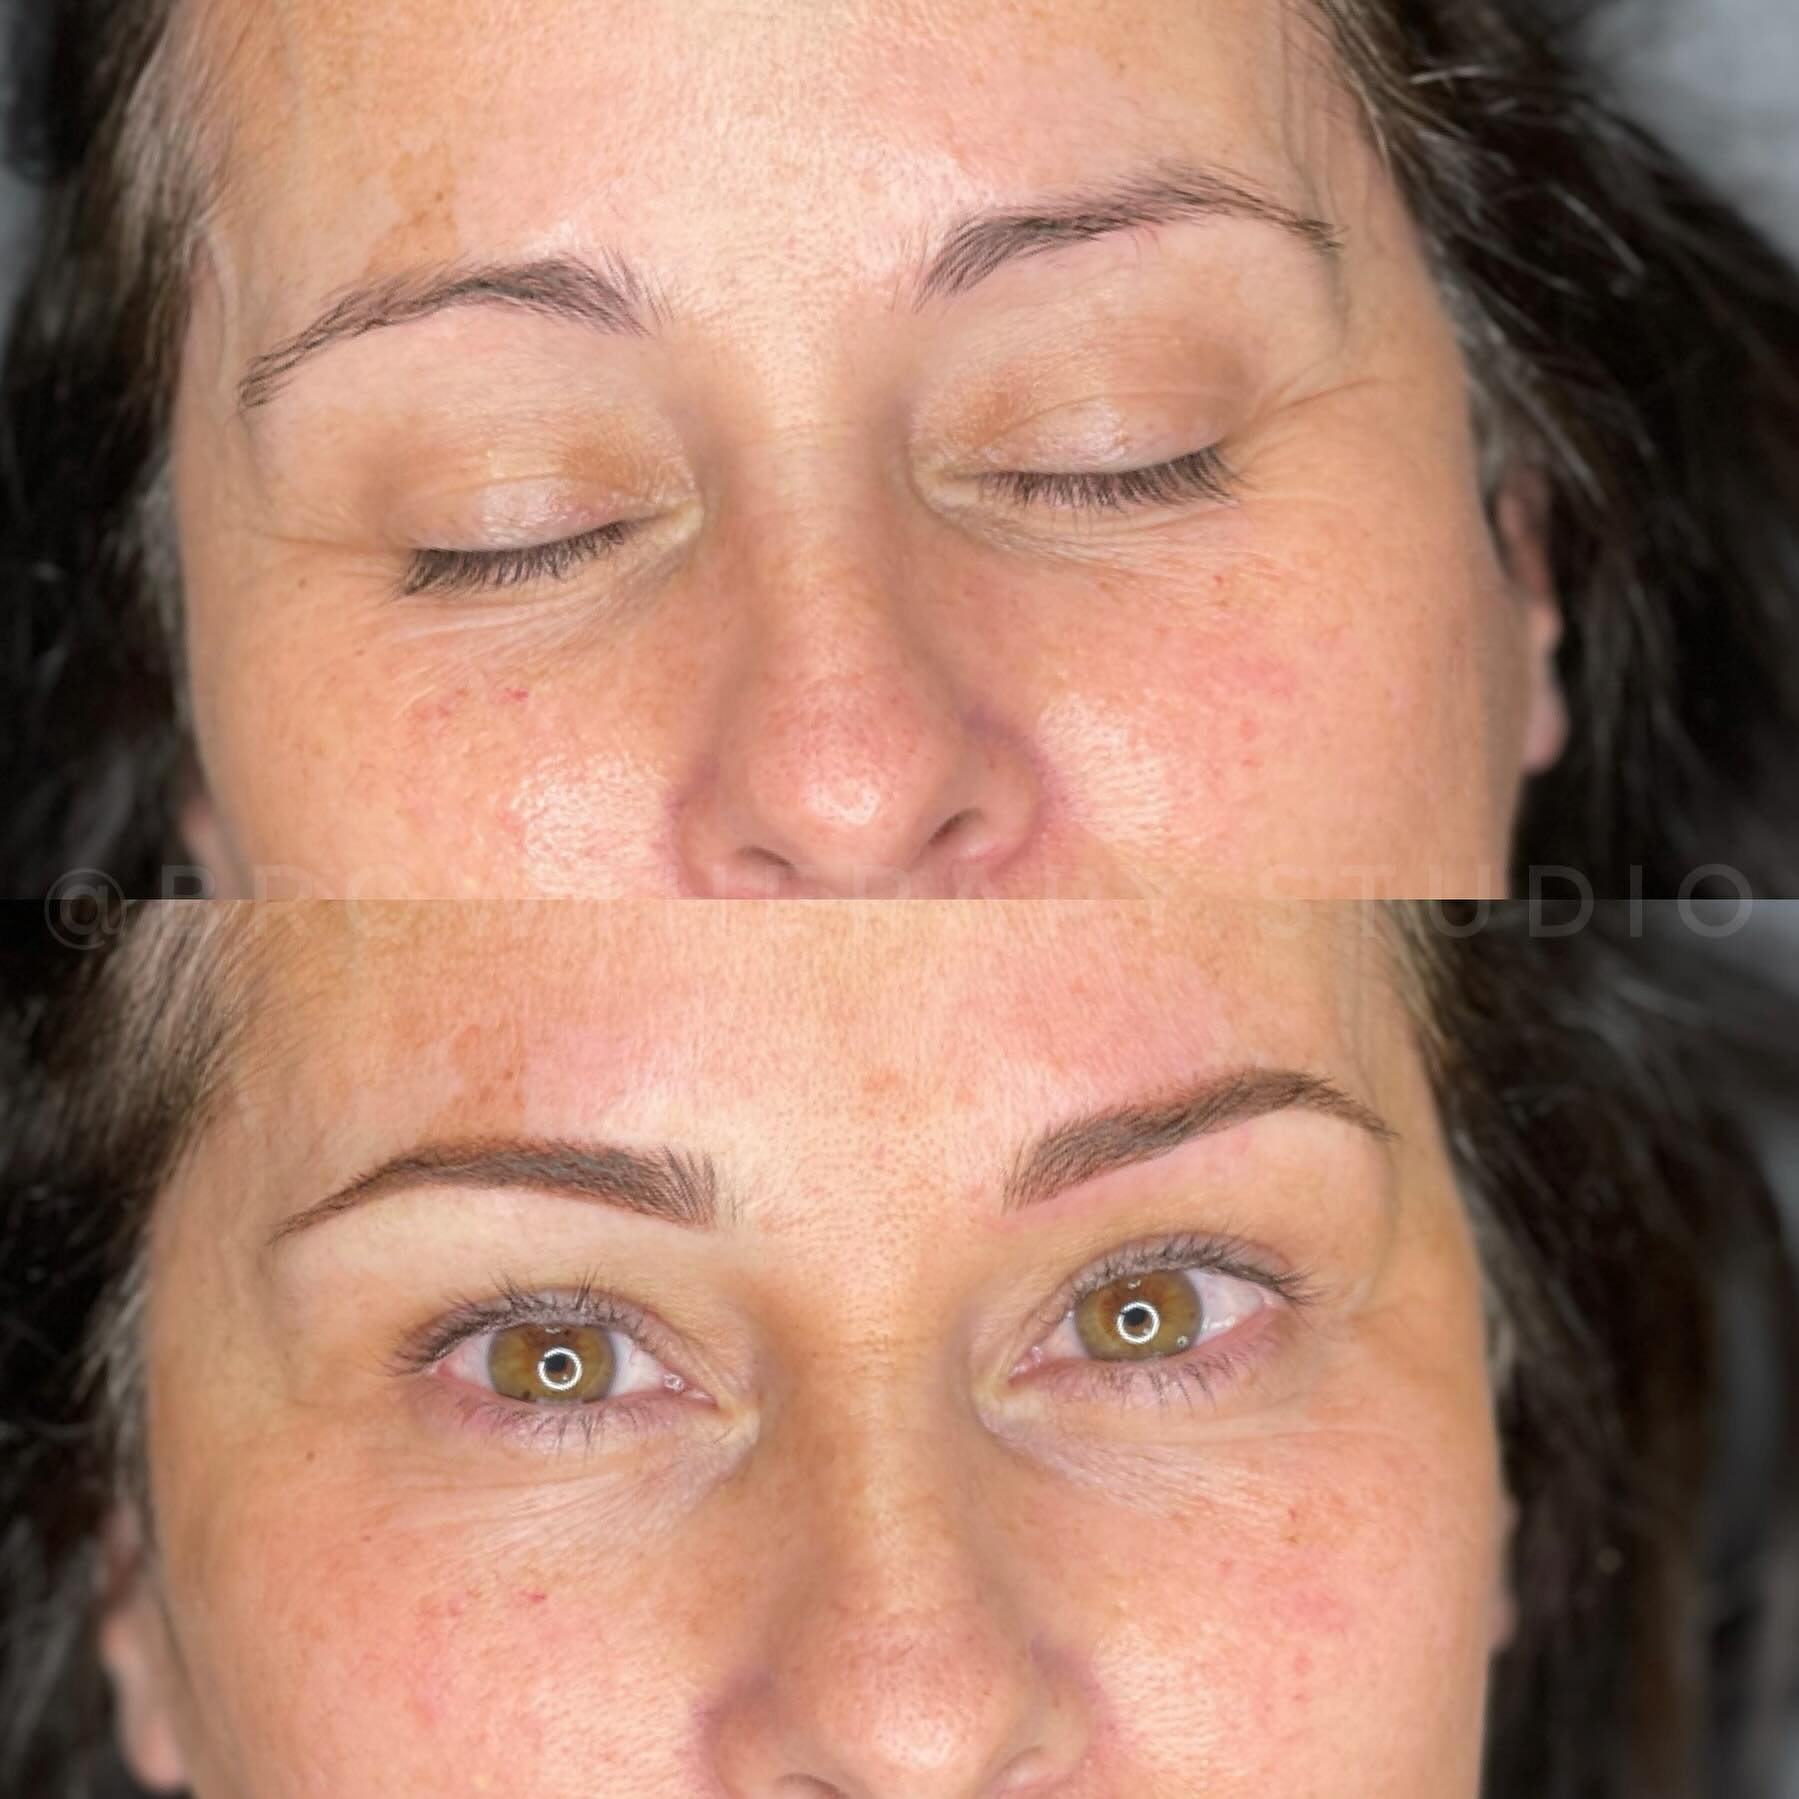 Beautiful soft and natural Ombre Powder Brow transformation! 

𝘽𝙤𝙤𝙠 𝙮𝙤𝙪𝙧 𝙖𝙥𝙥𝙤𝙞𝙣𝙩𝙢𝙚𝙣𝙩 𝙩𝙤𝙙𝙖𝙮 𝙬𝙞𝙩𝙝 𝙤𝙣𝙚 𝙤𝙛 𝙤𝙪𝙧 𝙨𝙠𝙞𝙡𝙡𝙚𝙙 𝘼𝙧𝙩𝙞𝙨𝙩. 

𝟱&frac12; 𝗚𝗿𝗲𝗲𝗻𝘃𝗶𝗹𝗹𝗲 𝗦𝘁𝗿𝗲𝗲𝘁 𝗦.
𝗡𝗲𝘄𝗻𝗮𝗻, 𝗚𝗮 𝟯𝟬𝟮𝟲